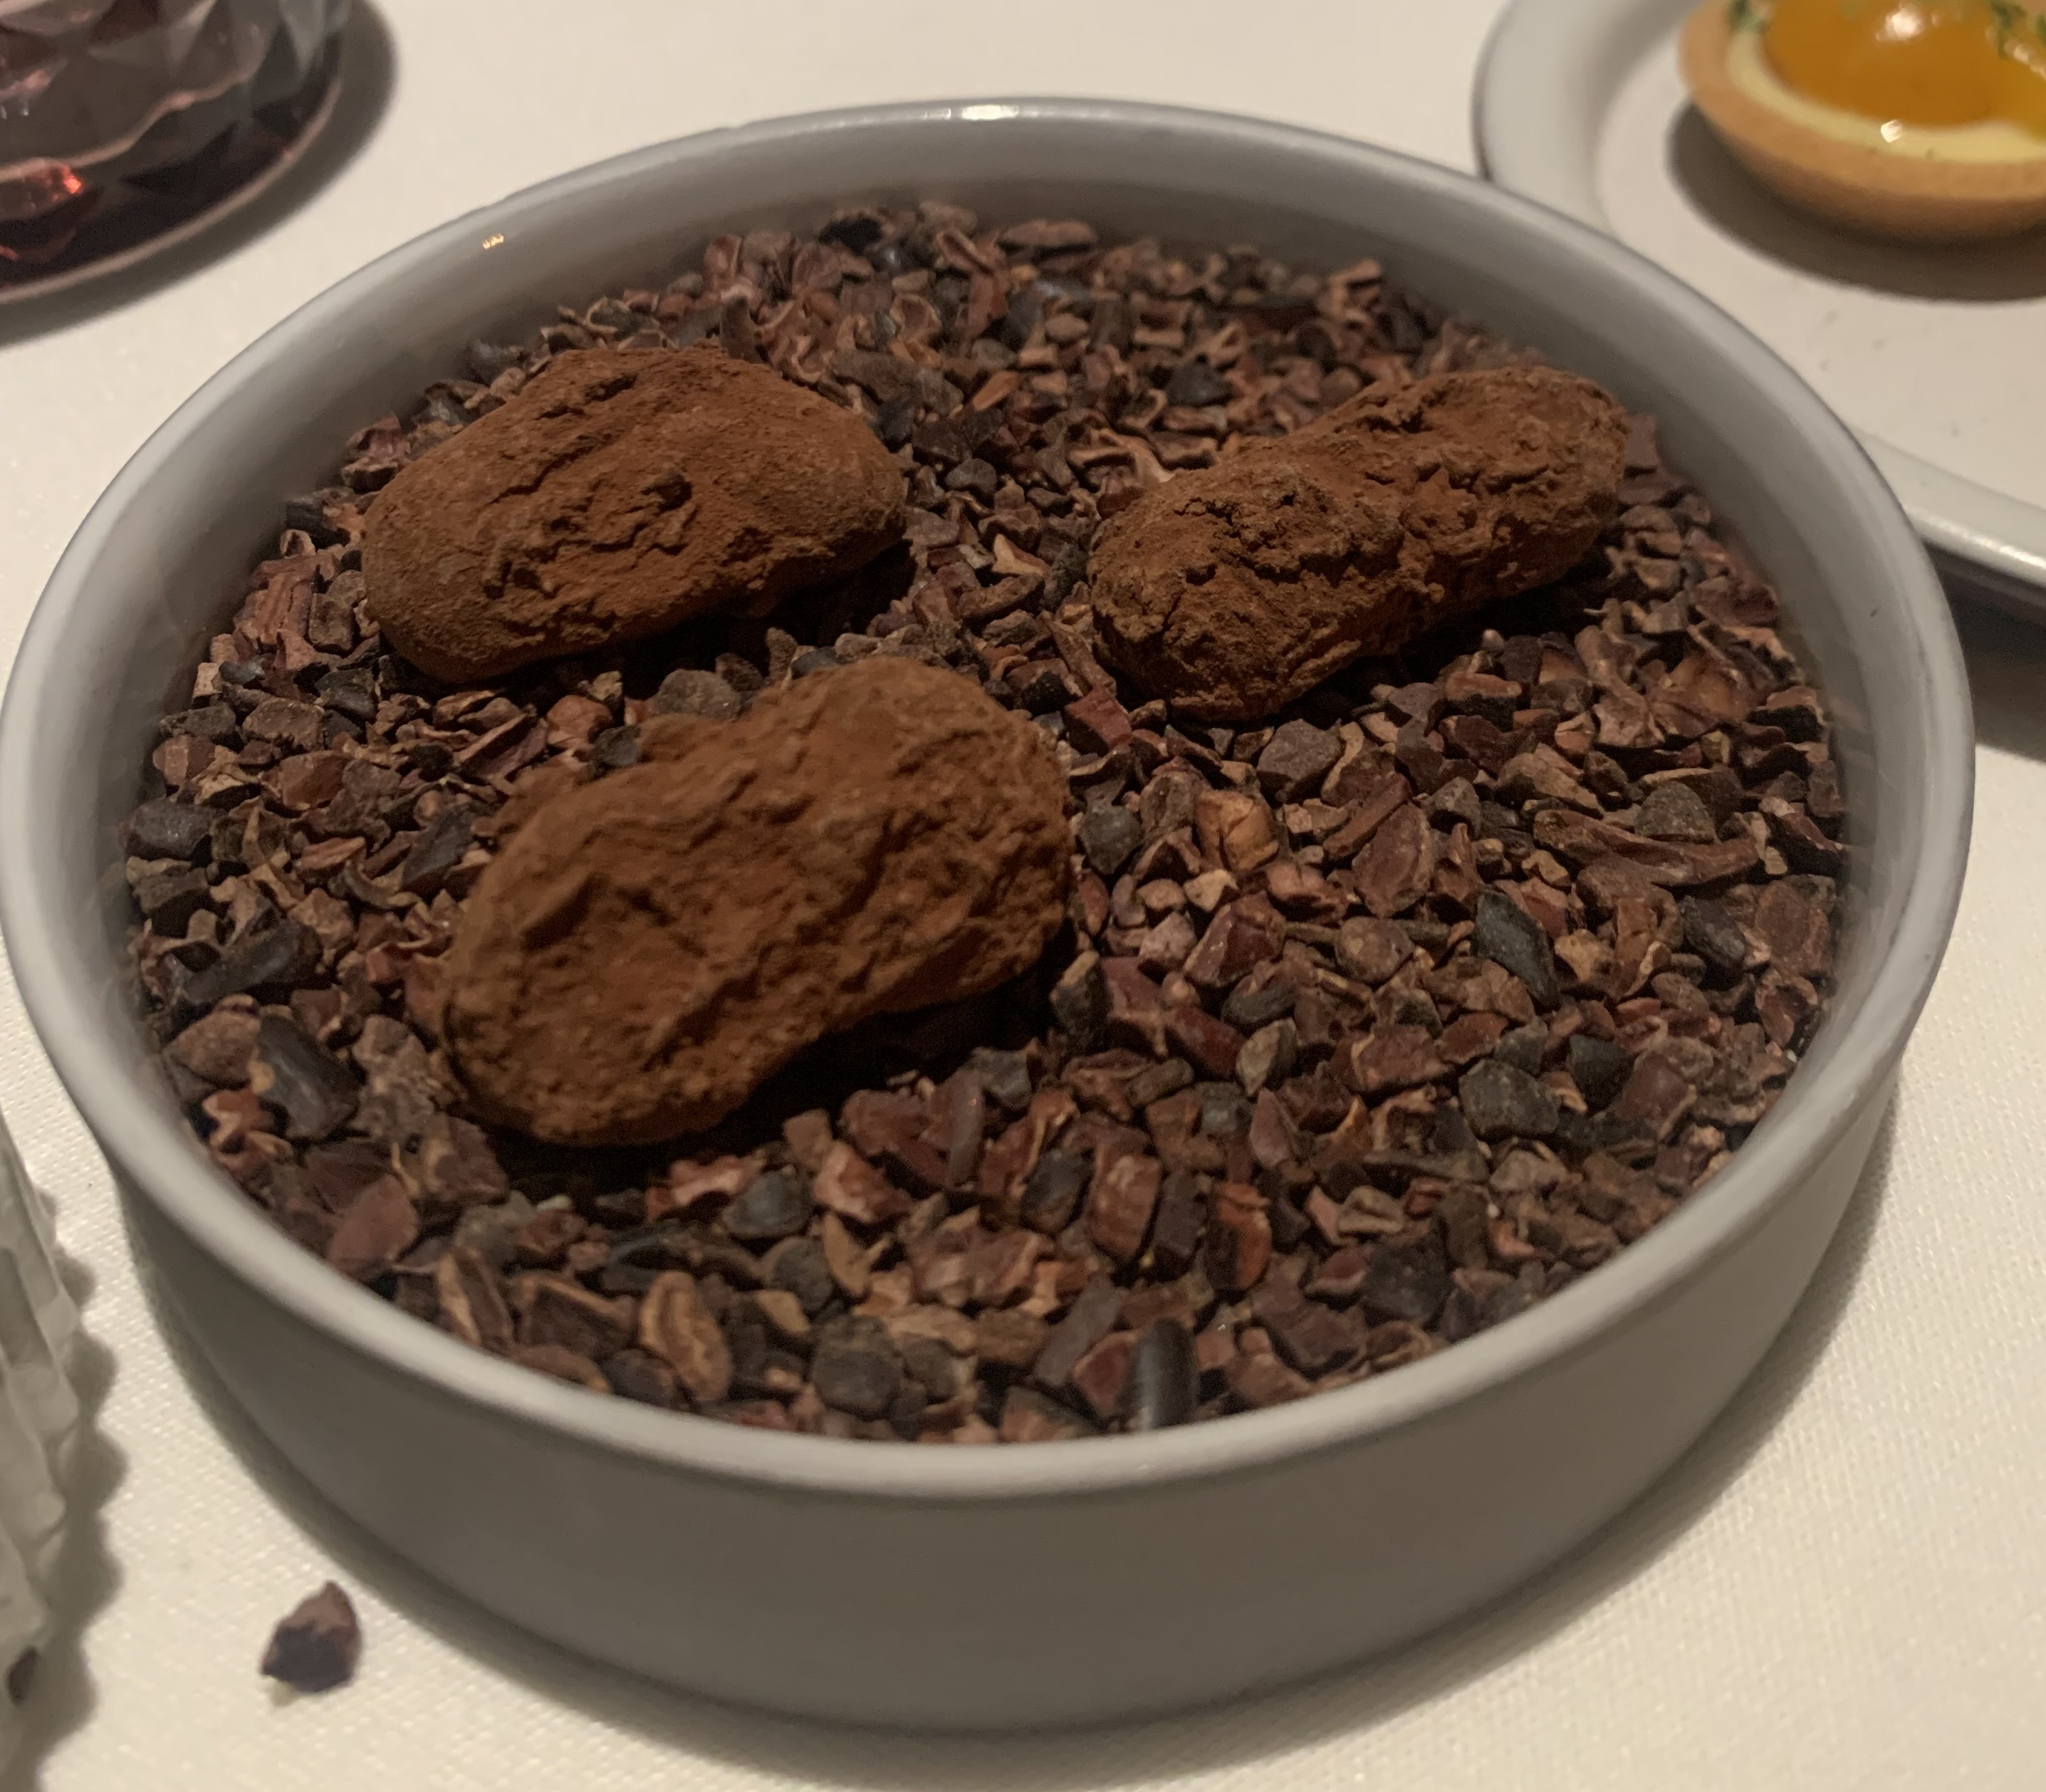 Three irregularly-shaped chocolates covered in a brown-red cocoa powder, served on a bed of roughly-chopped cocoa nibs/pods. It has a very rustic, forest-floor look.